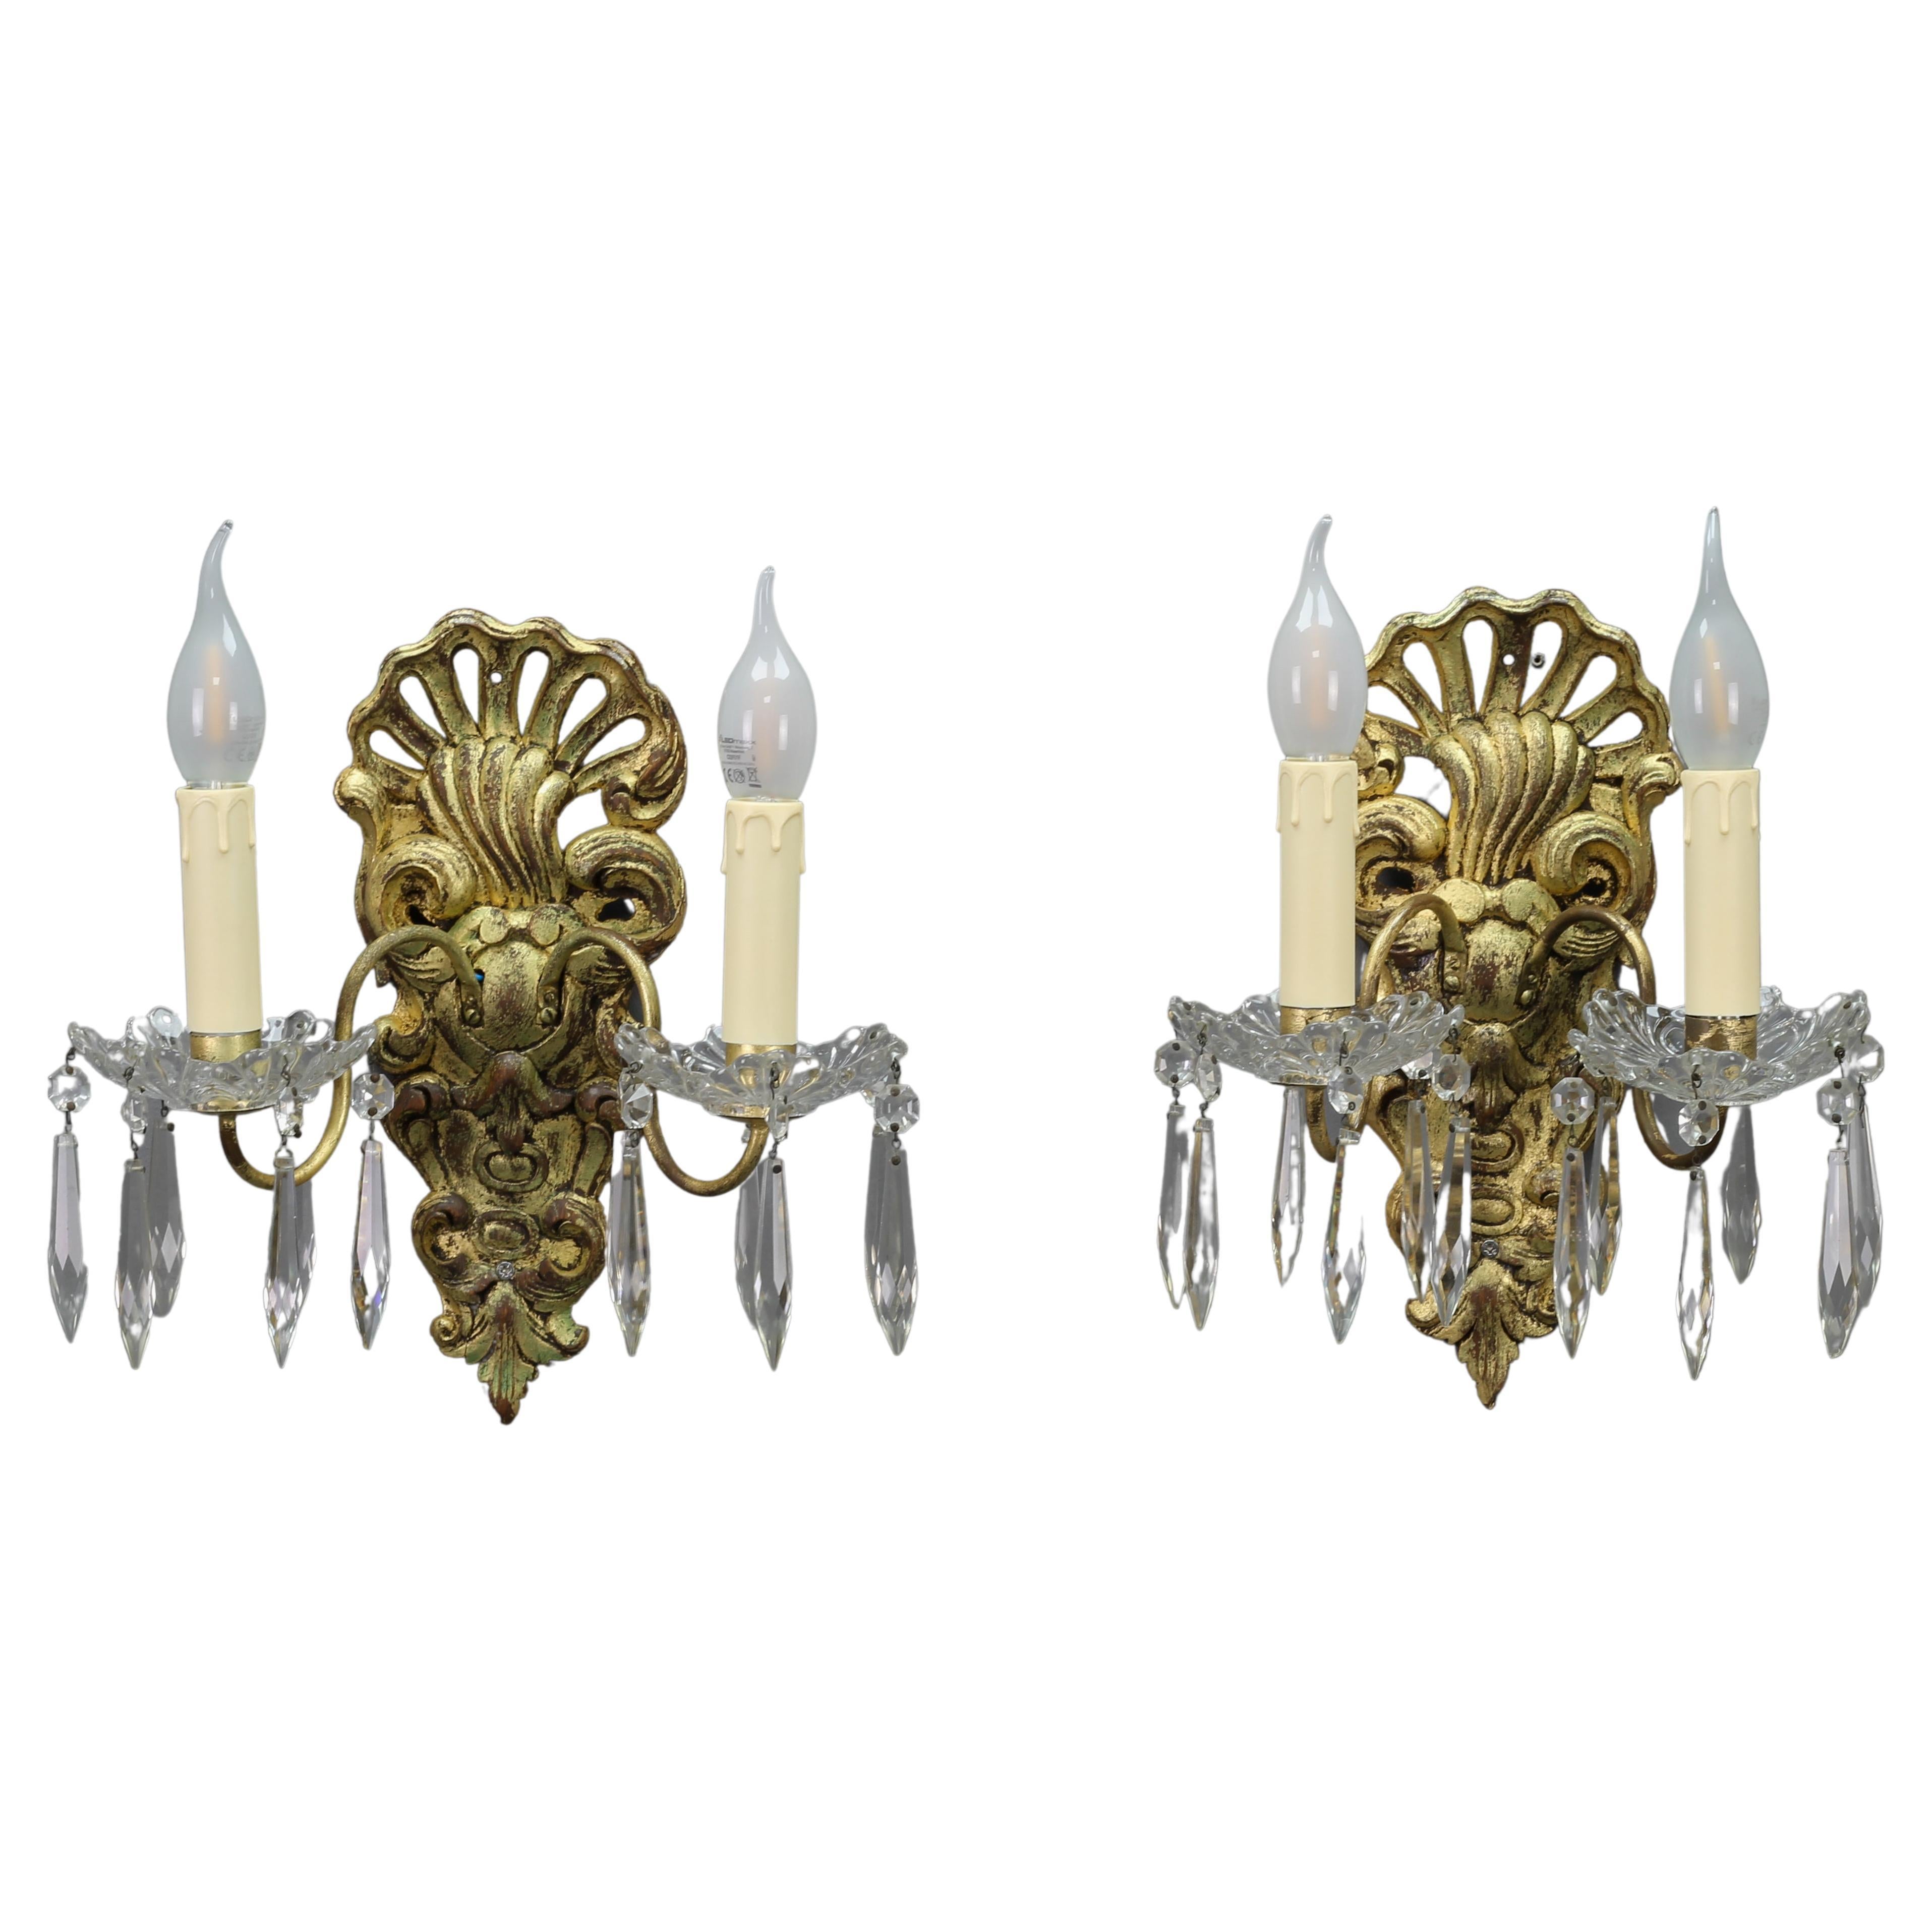 Pair of French Rococo Style Carved Giltwood and Crystal Glass Sconces